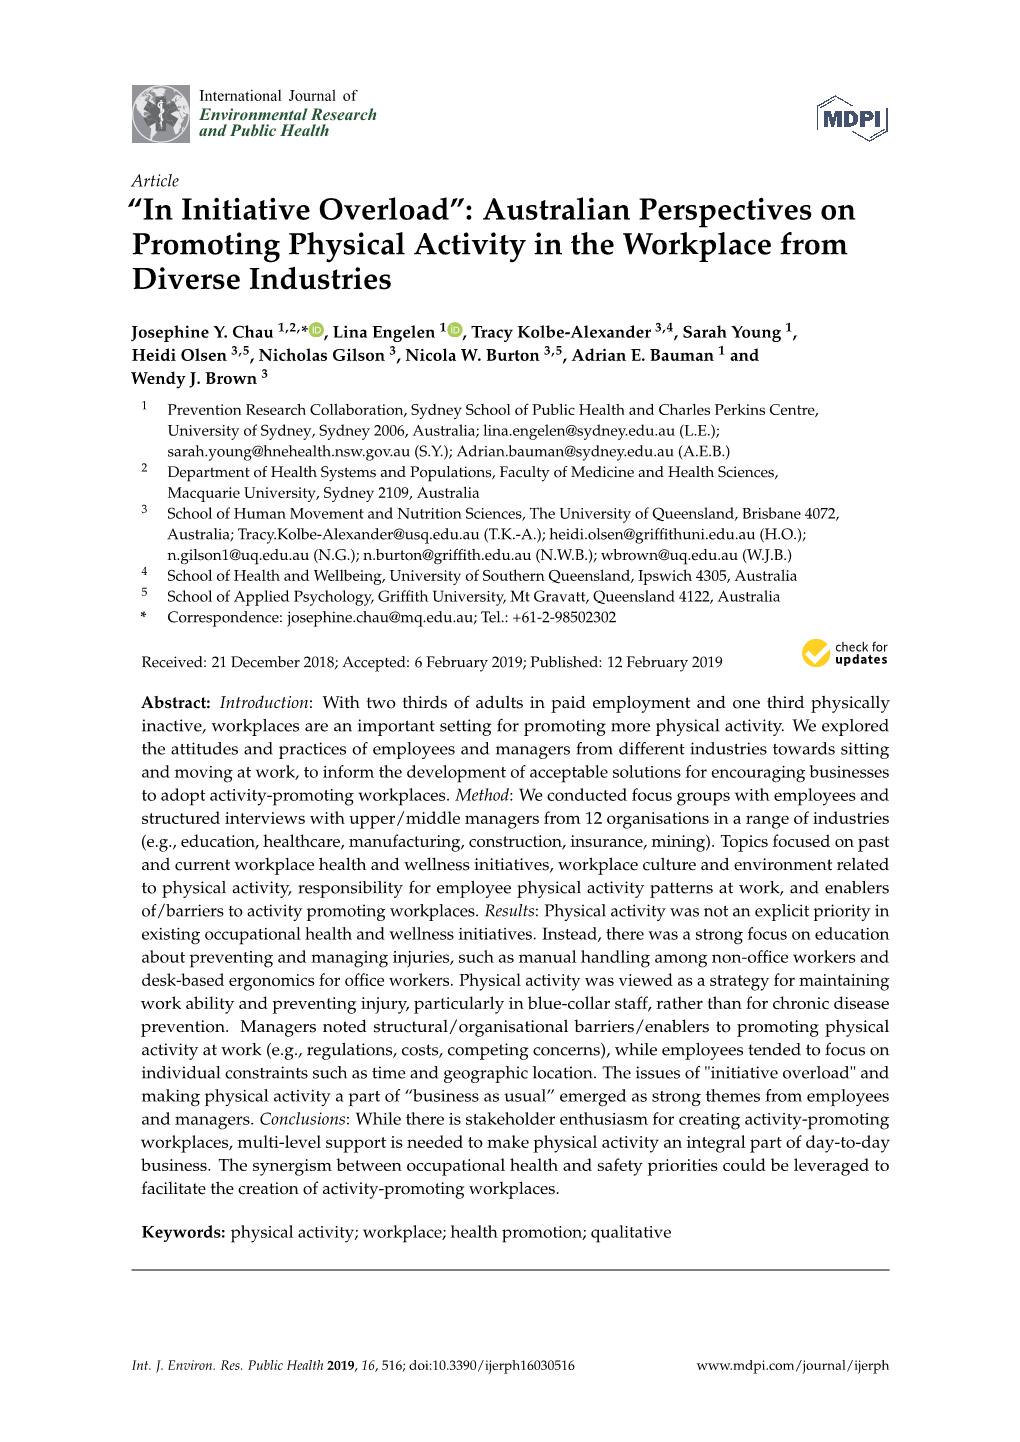 “In Initiative Overload”: Australian Perspectives on Promoting Physical Activity in the Workplace from Diverse Industries